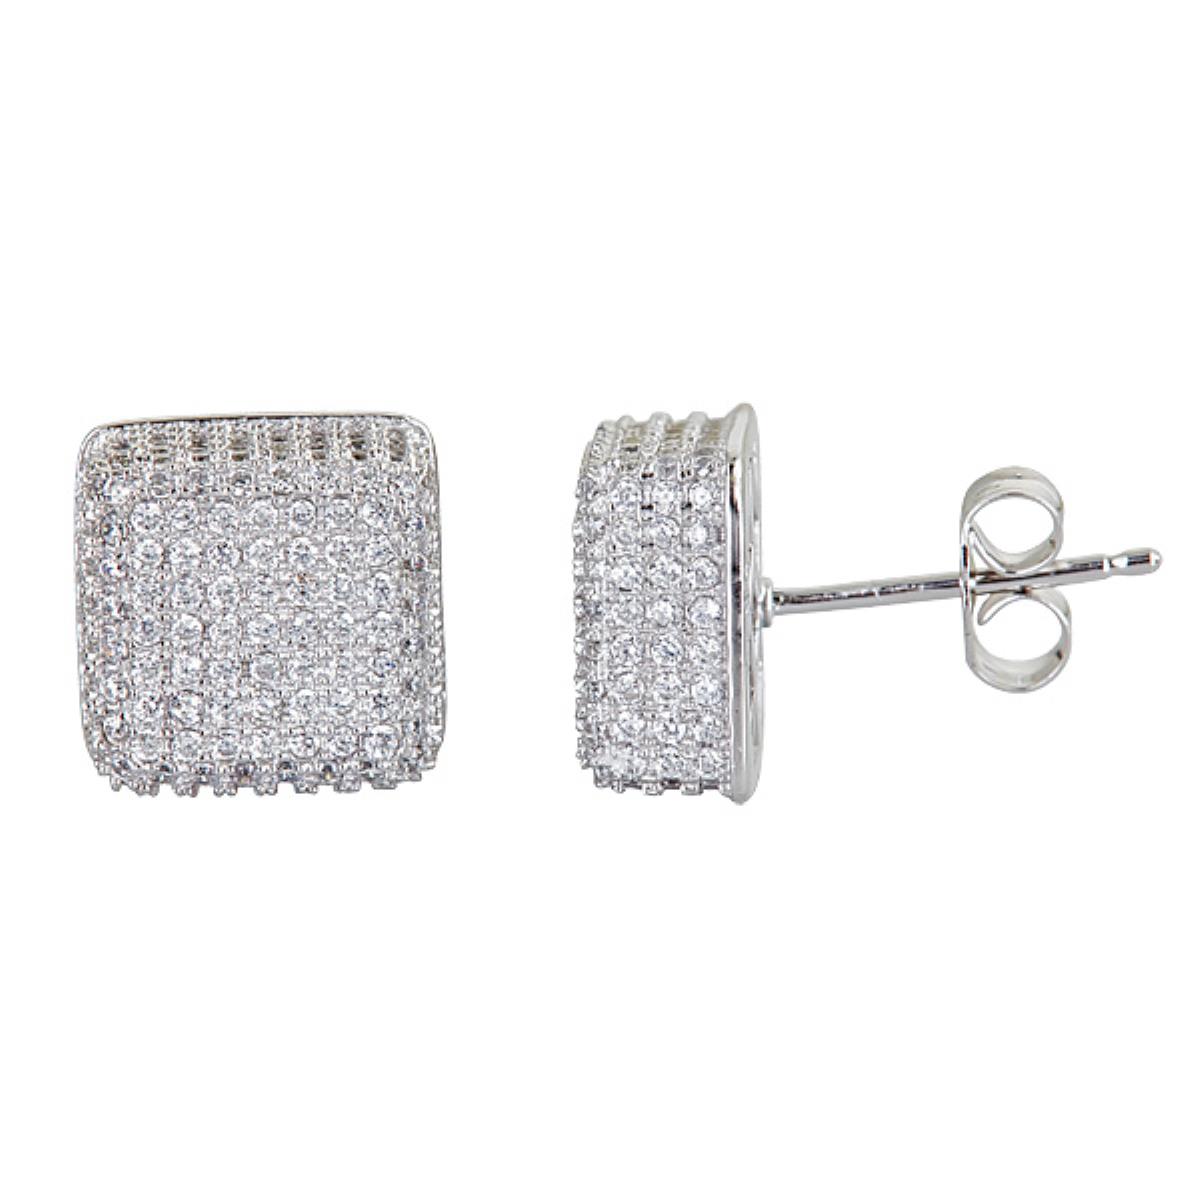 Sterling Silver Micropave 3D Square Stud Earring